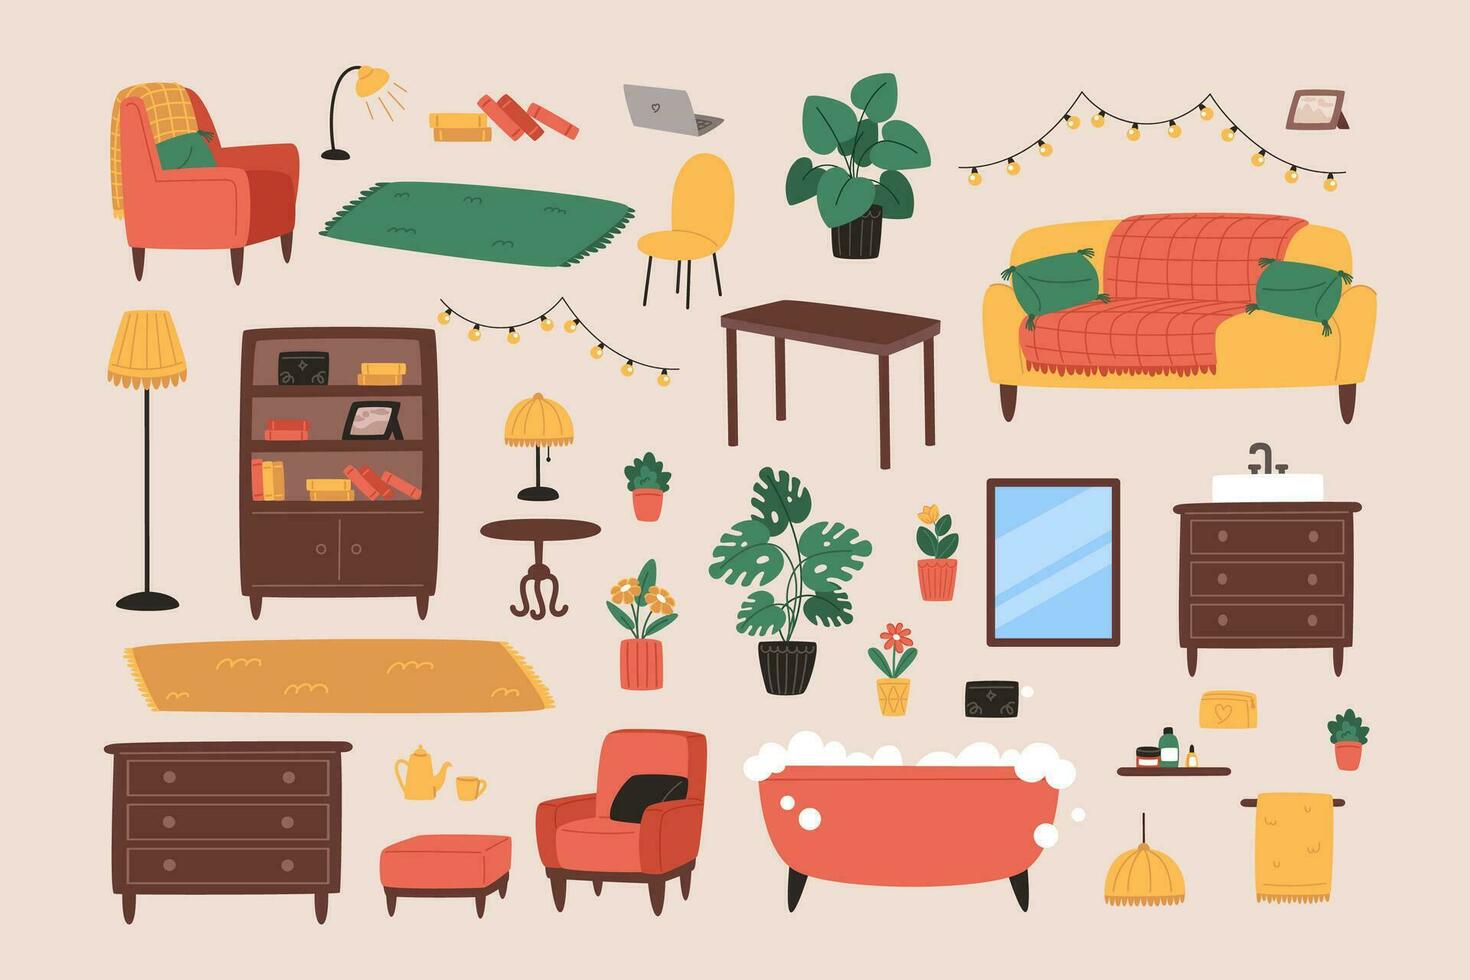 A collection of furniture and decor items for a cozy interior for the home vector